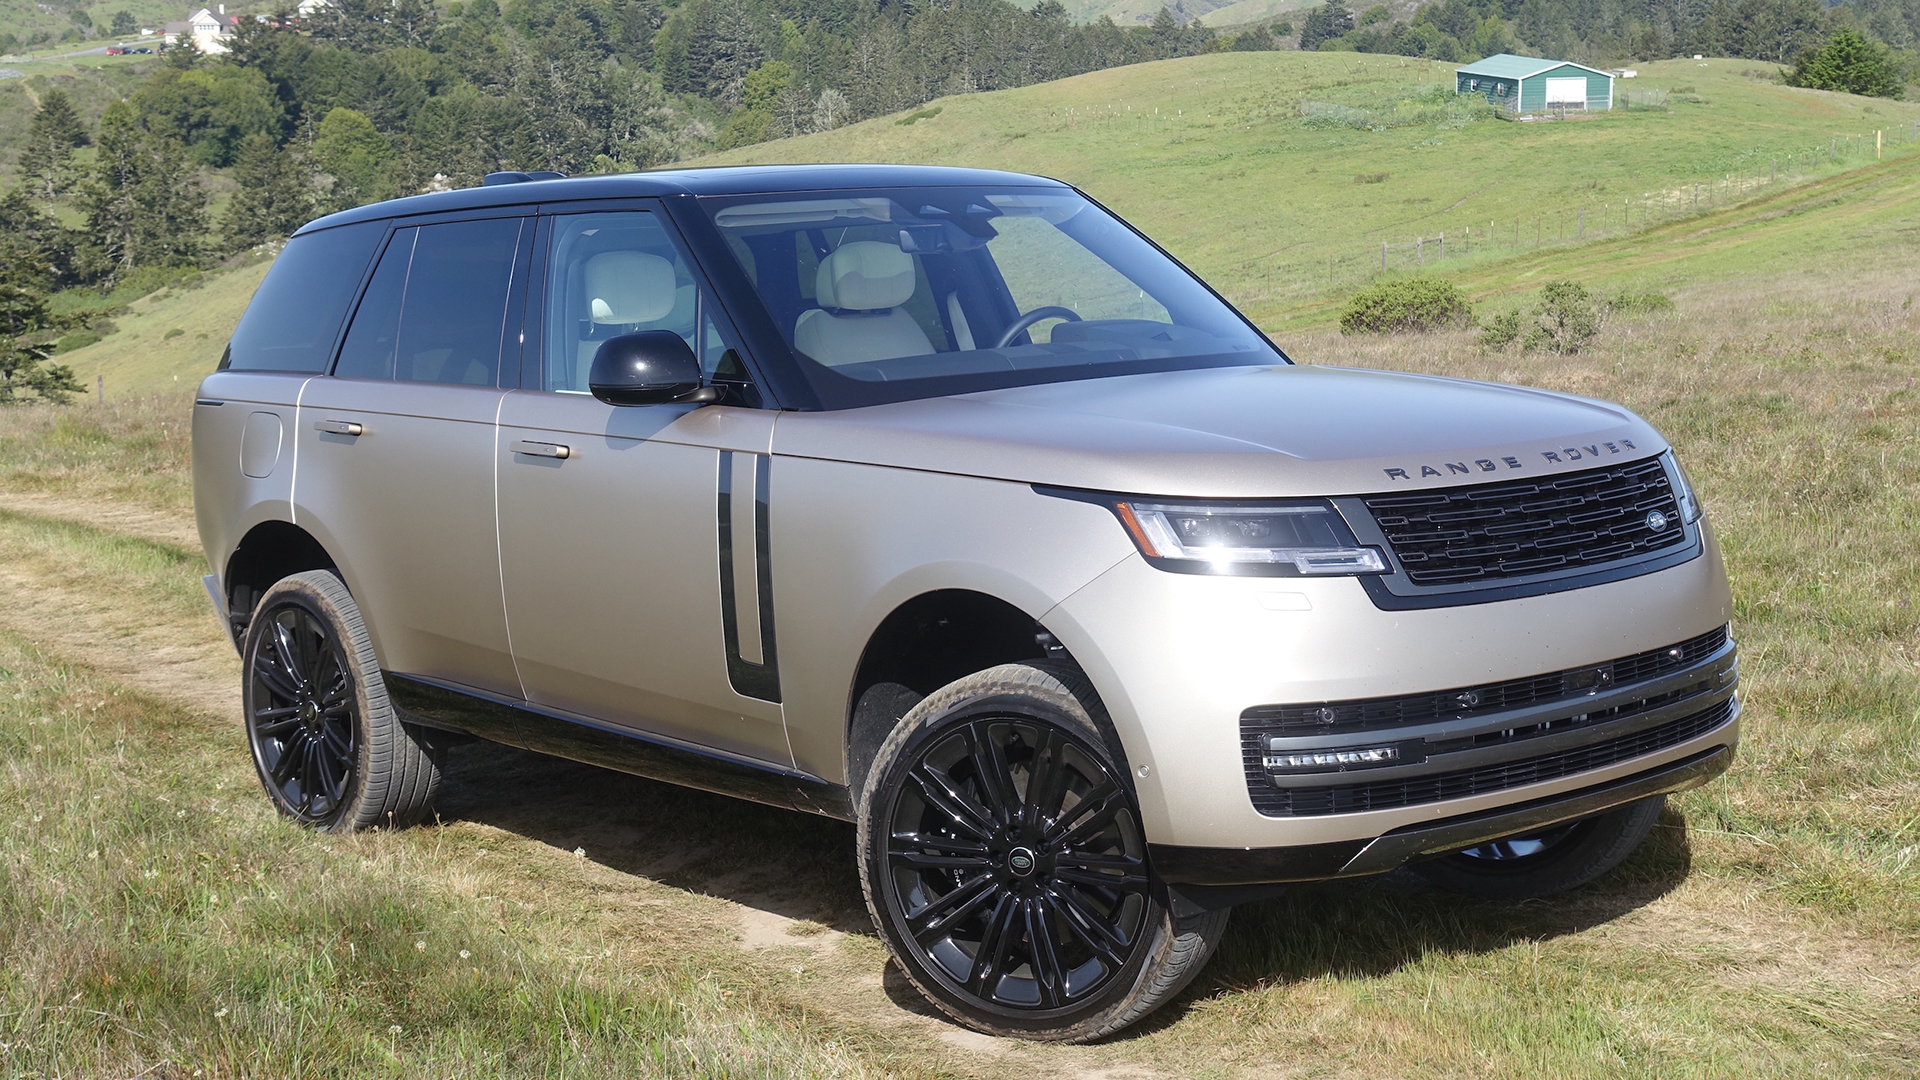 The fifth-generation Range Rover rides out